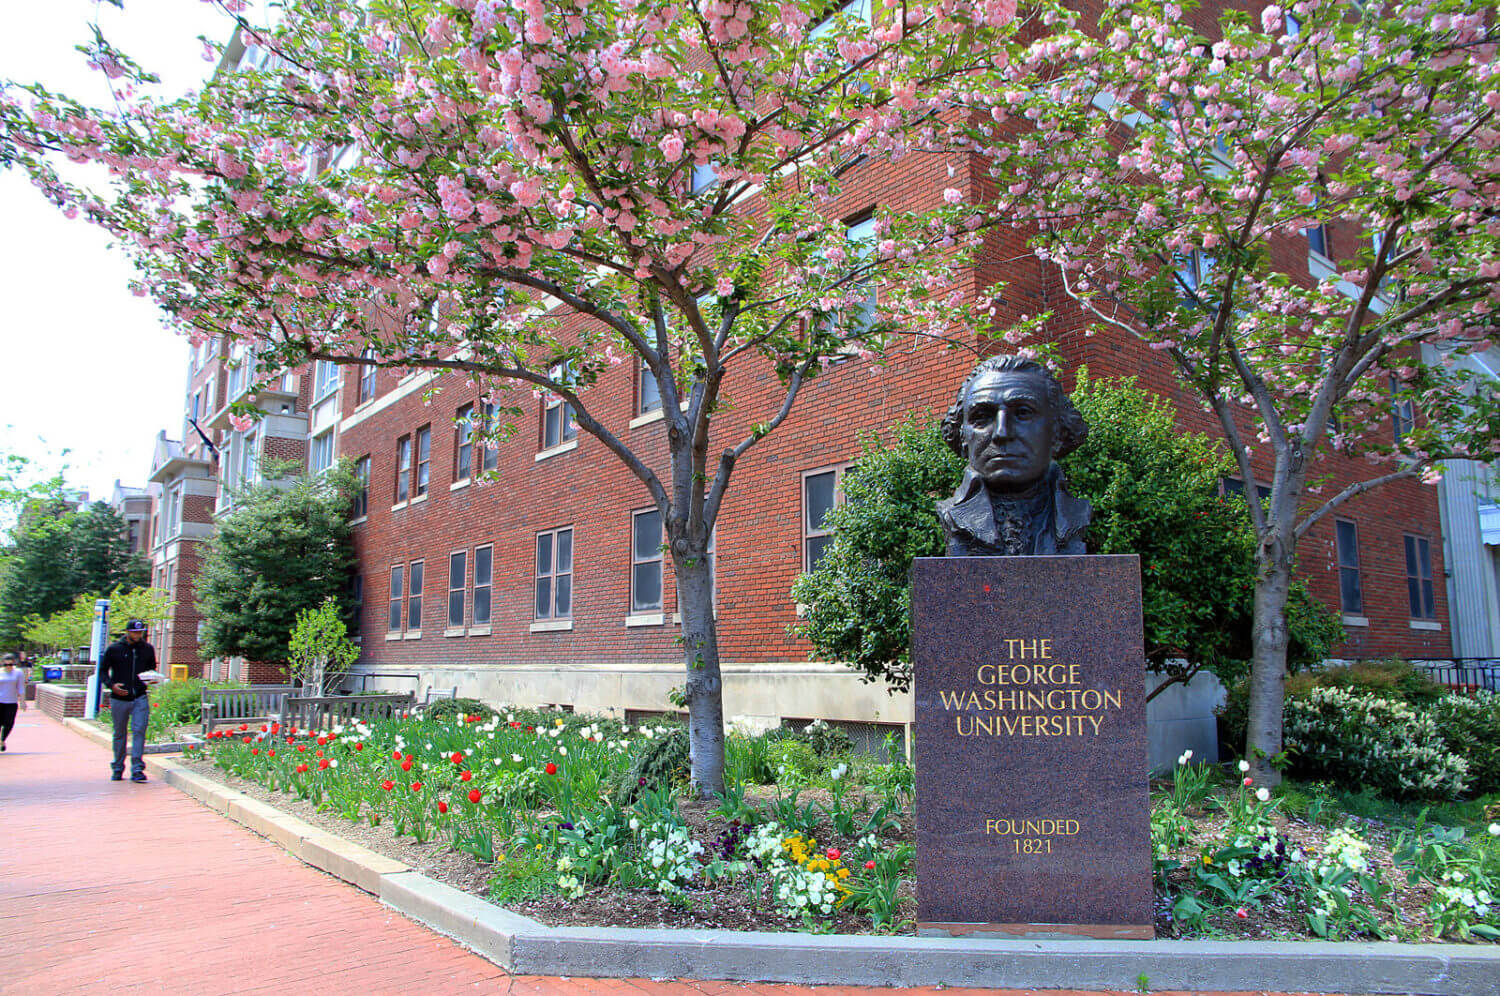 What Is George Washington University Known For?